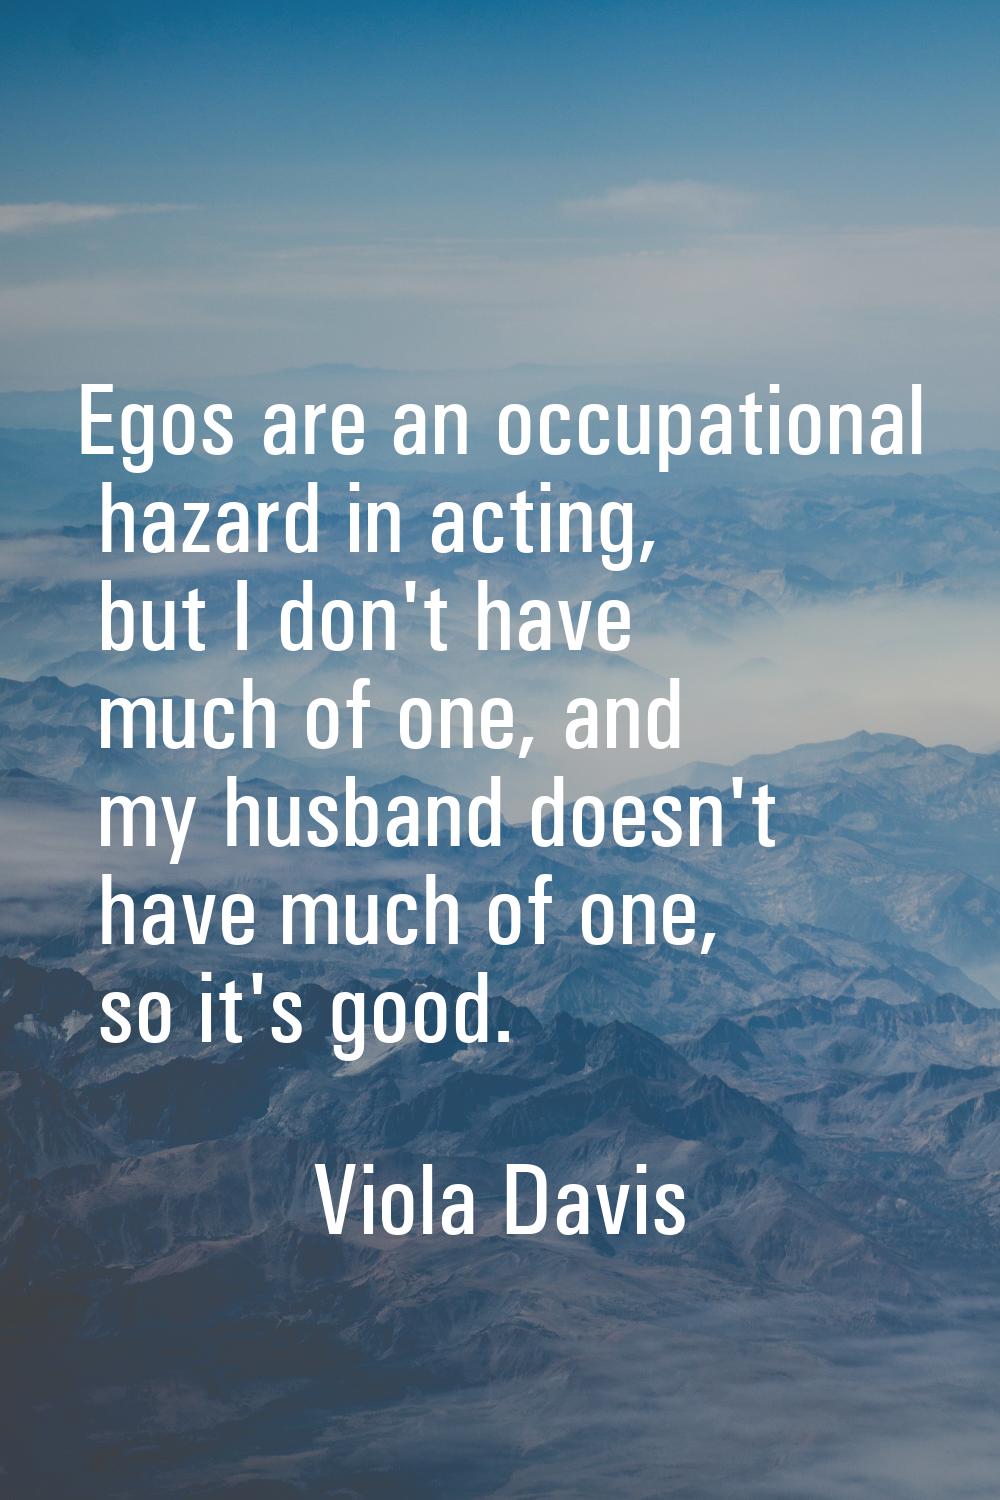 Egos are an occupational hazard in acting, but I don't have much of one, and my husband doesn't hav